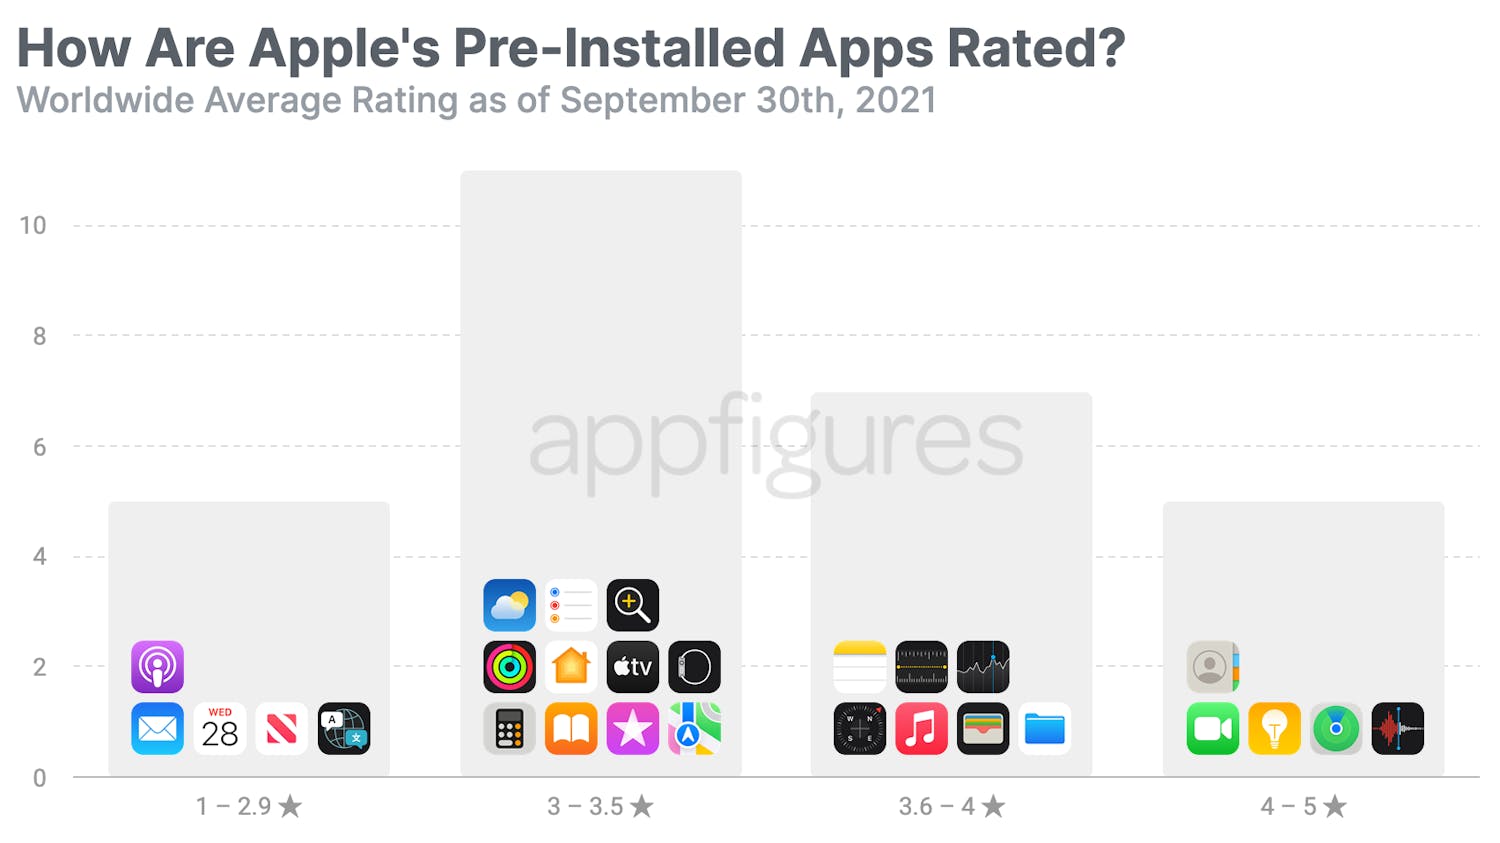 Apple’s Now Allowing Users to Rate Its Pre-Installed Apps – Here are the Numbers